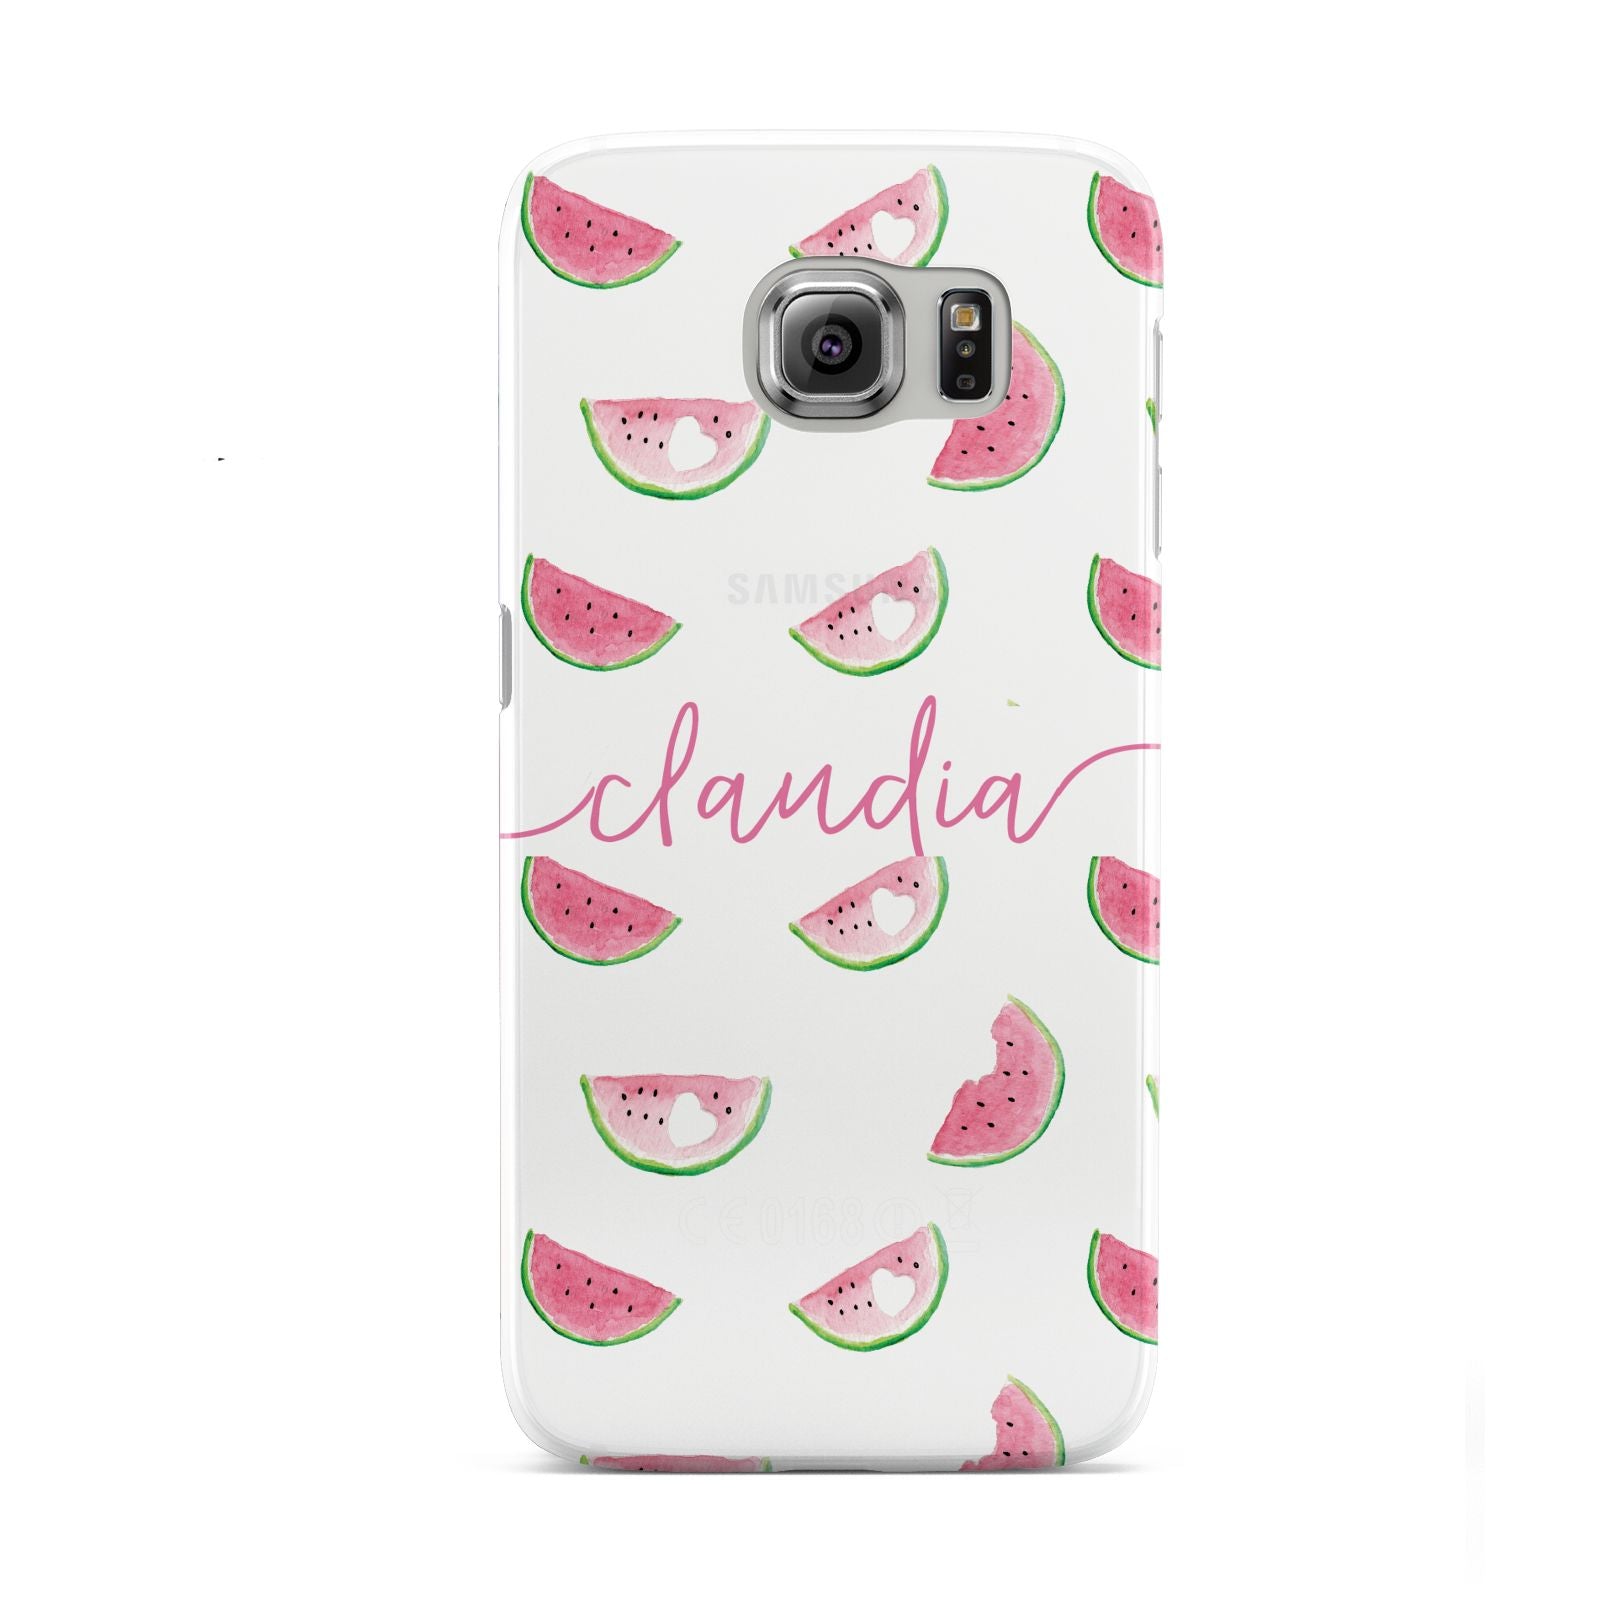 Personalised Transparent Watermelon Samsung Galaxy S6 Case